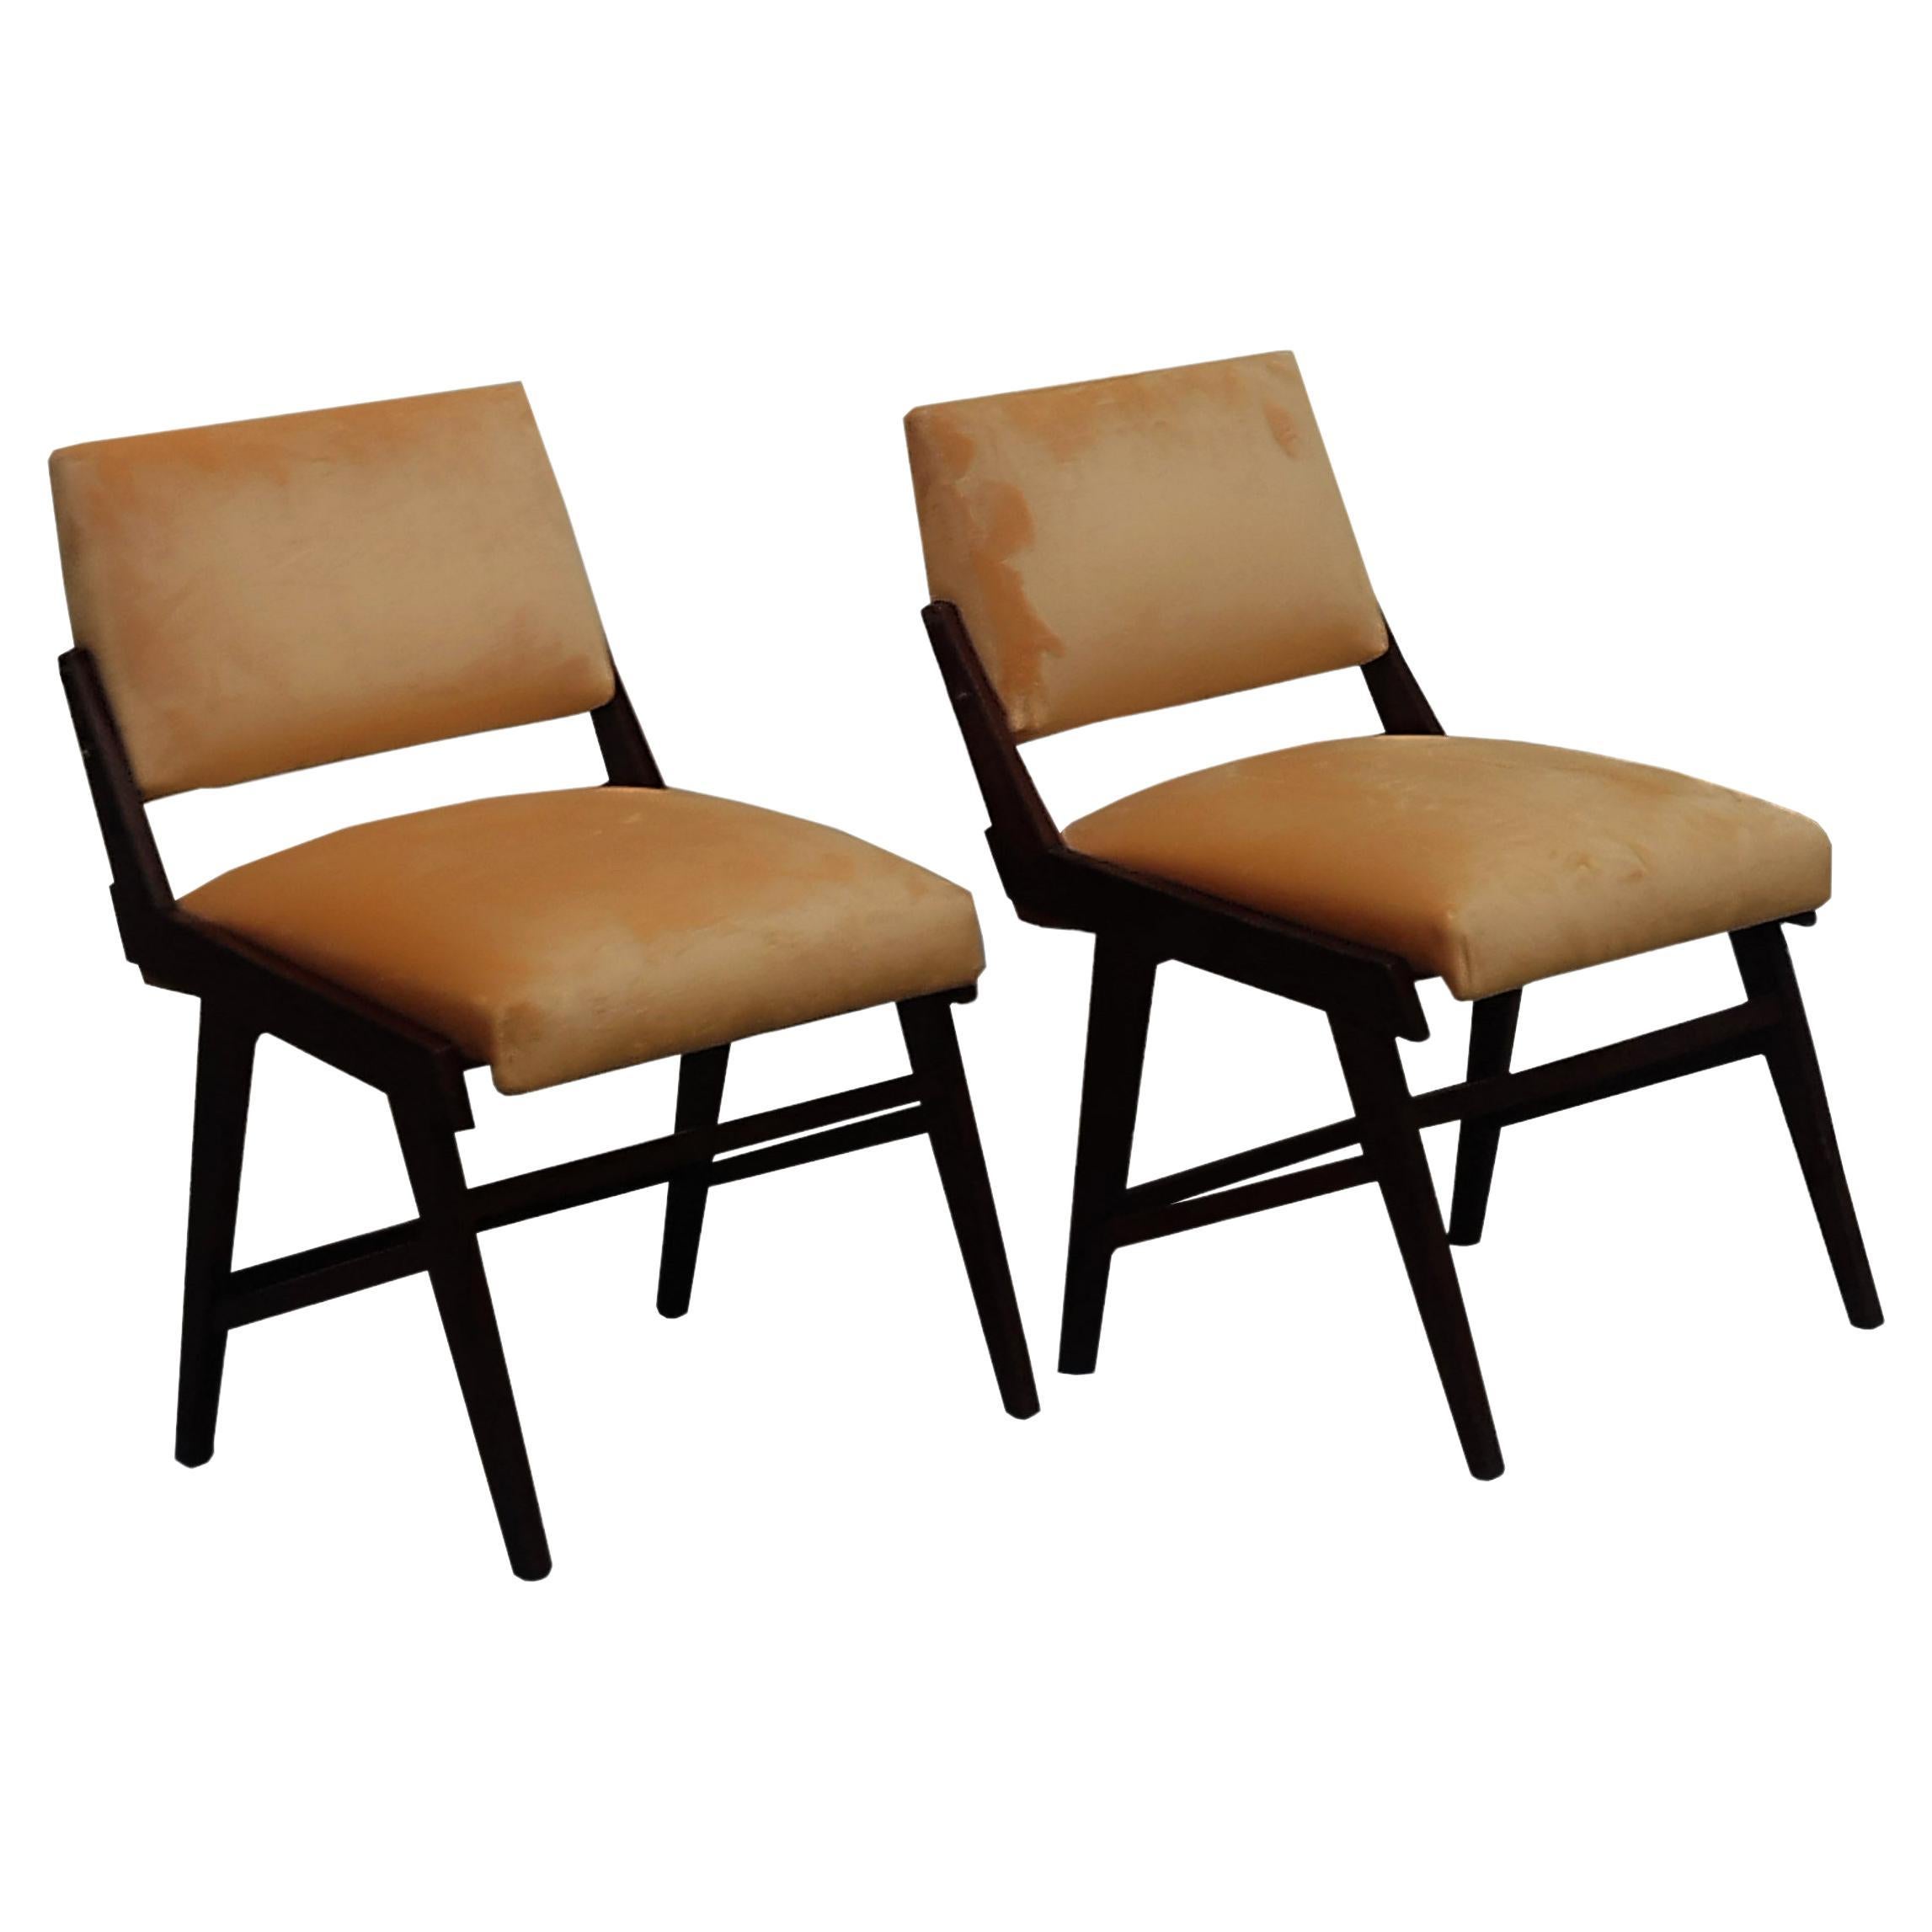 Ico Parisi Style Pair of Wood and Velvet Chairs, Italy 1960s For Sale